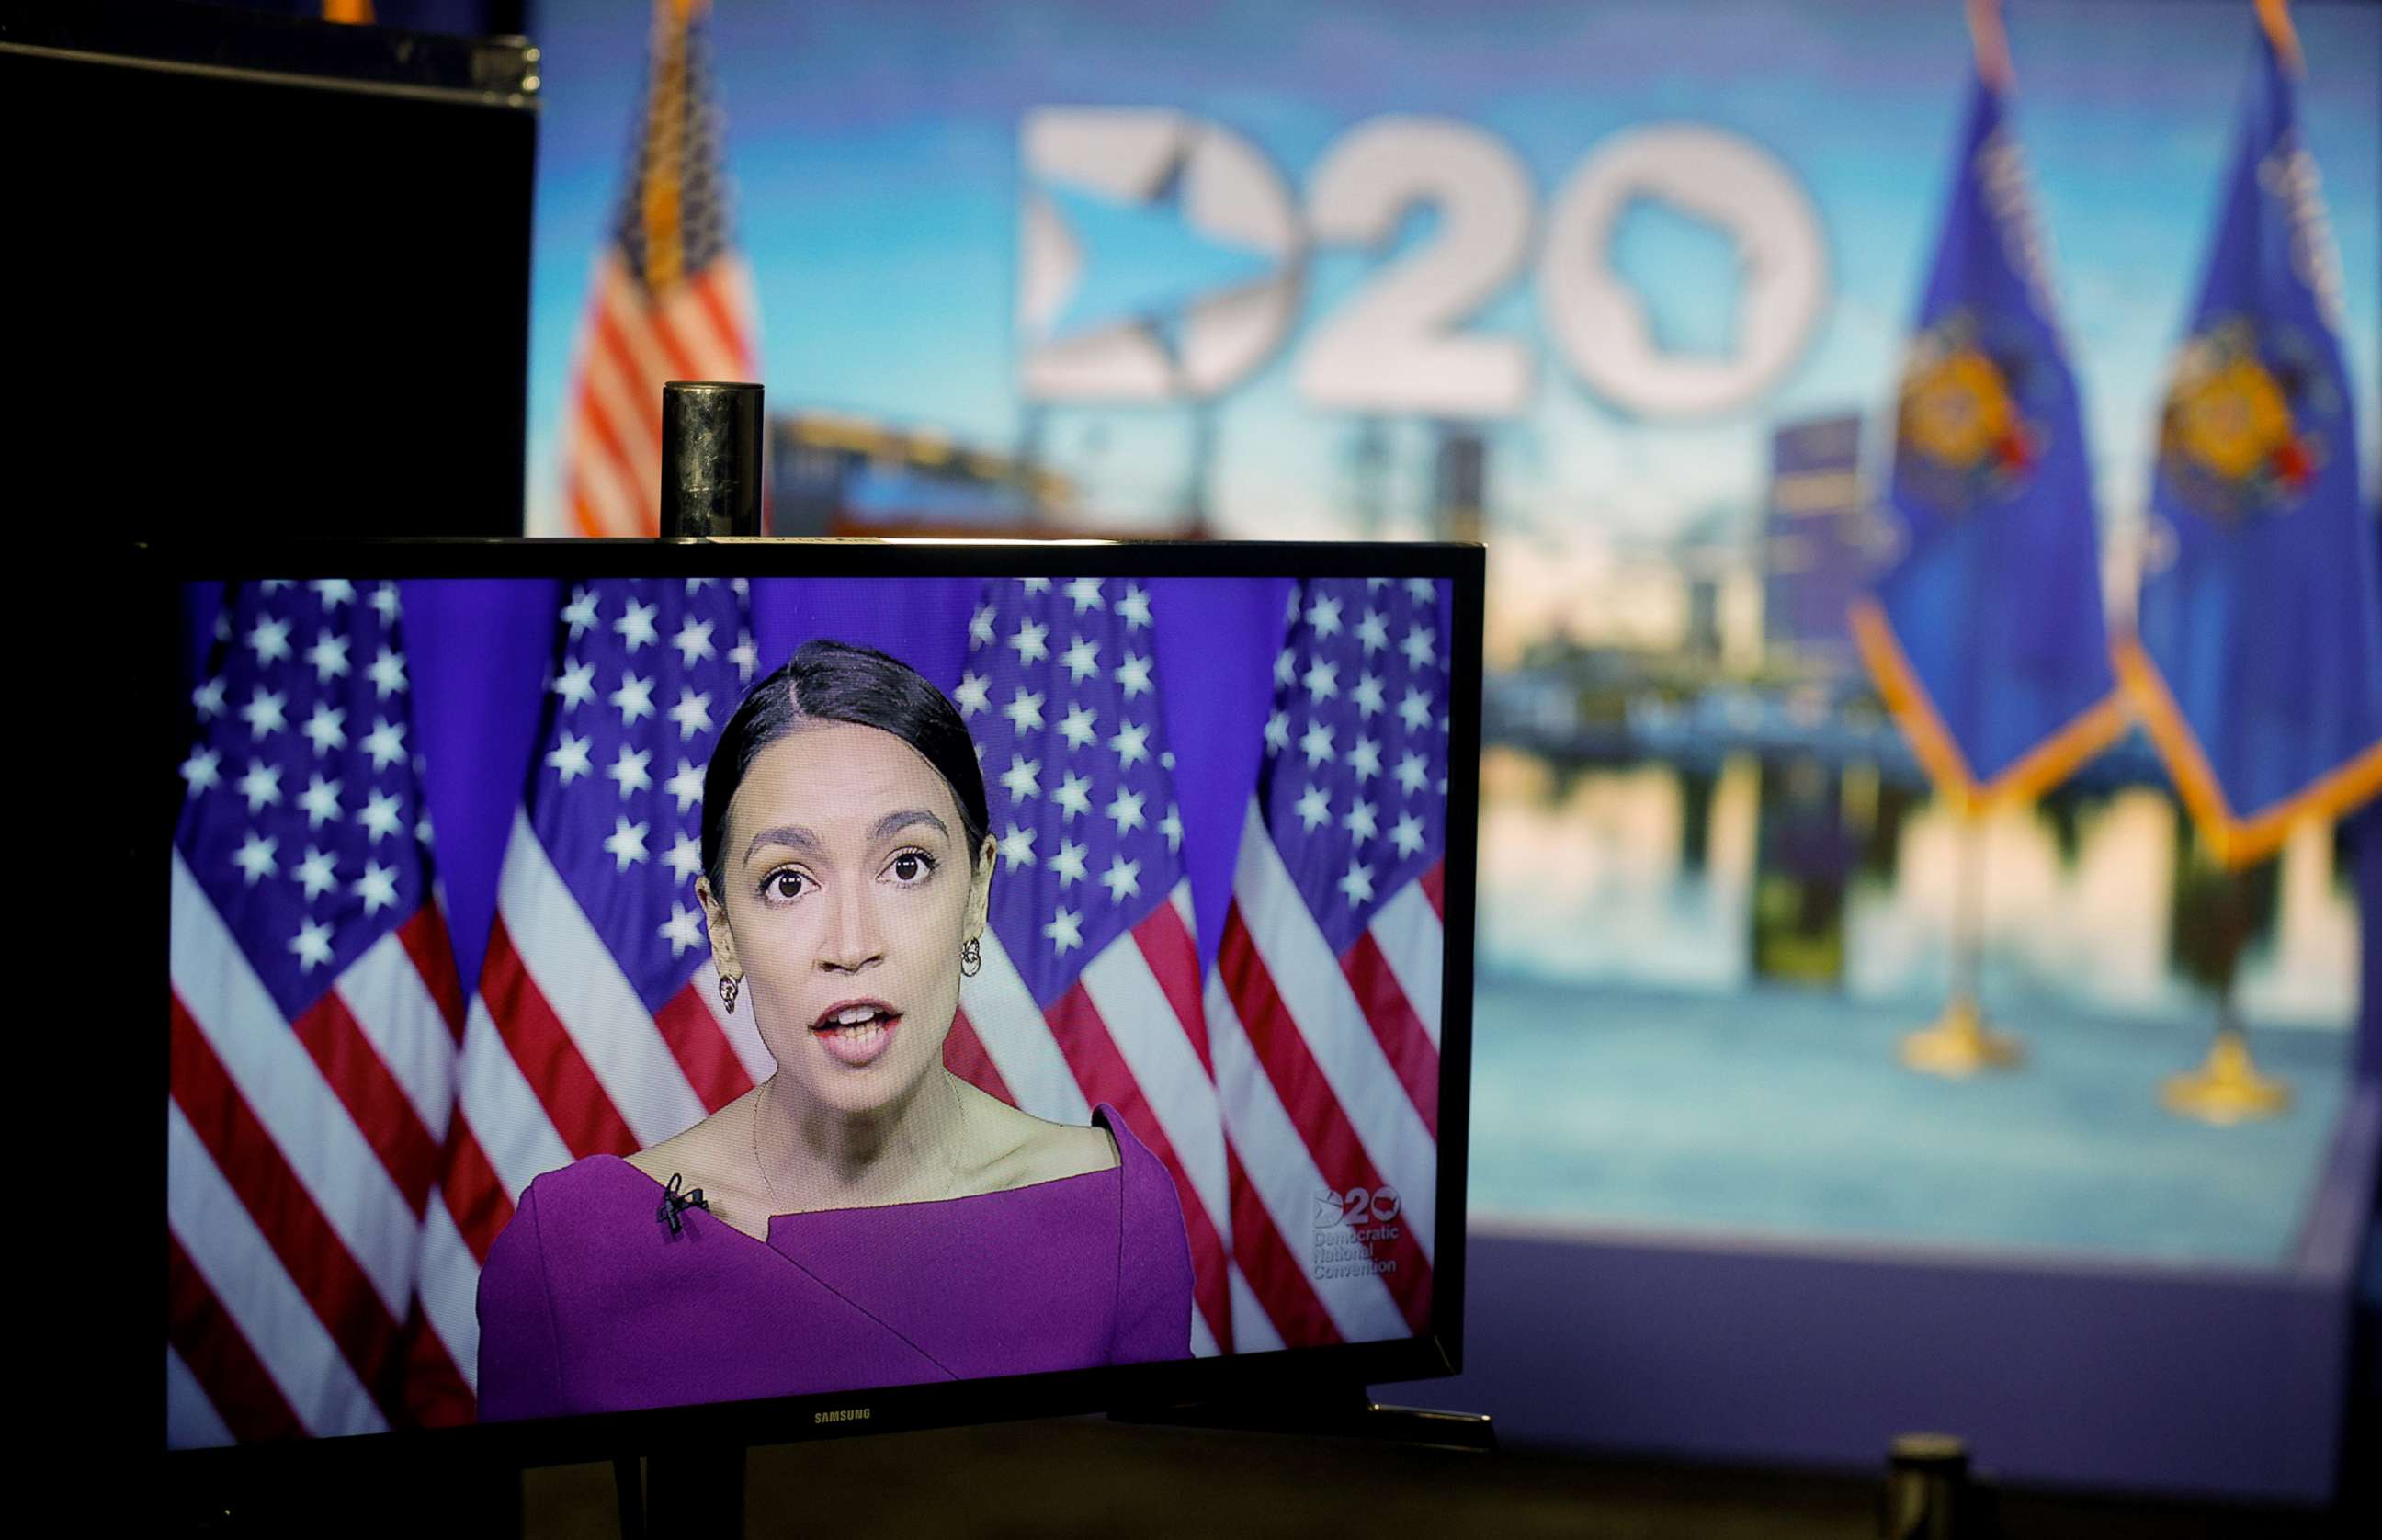 PHOTO: Rep. Alexandria Ocasio-Cortez addresses the second night of the virtual 2020 Democratic National Convention as she seconds the nomination of Senator Bernie Sanders via video feed, Aug. 18, 2020, with the stage in Milwaukee behind the TV screen.